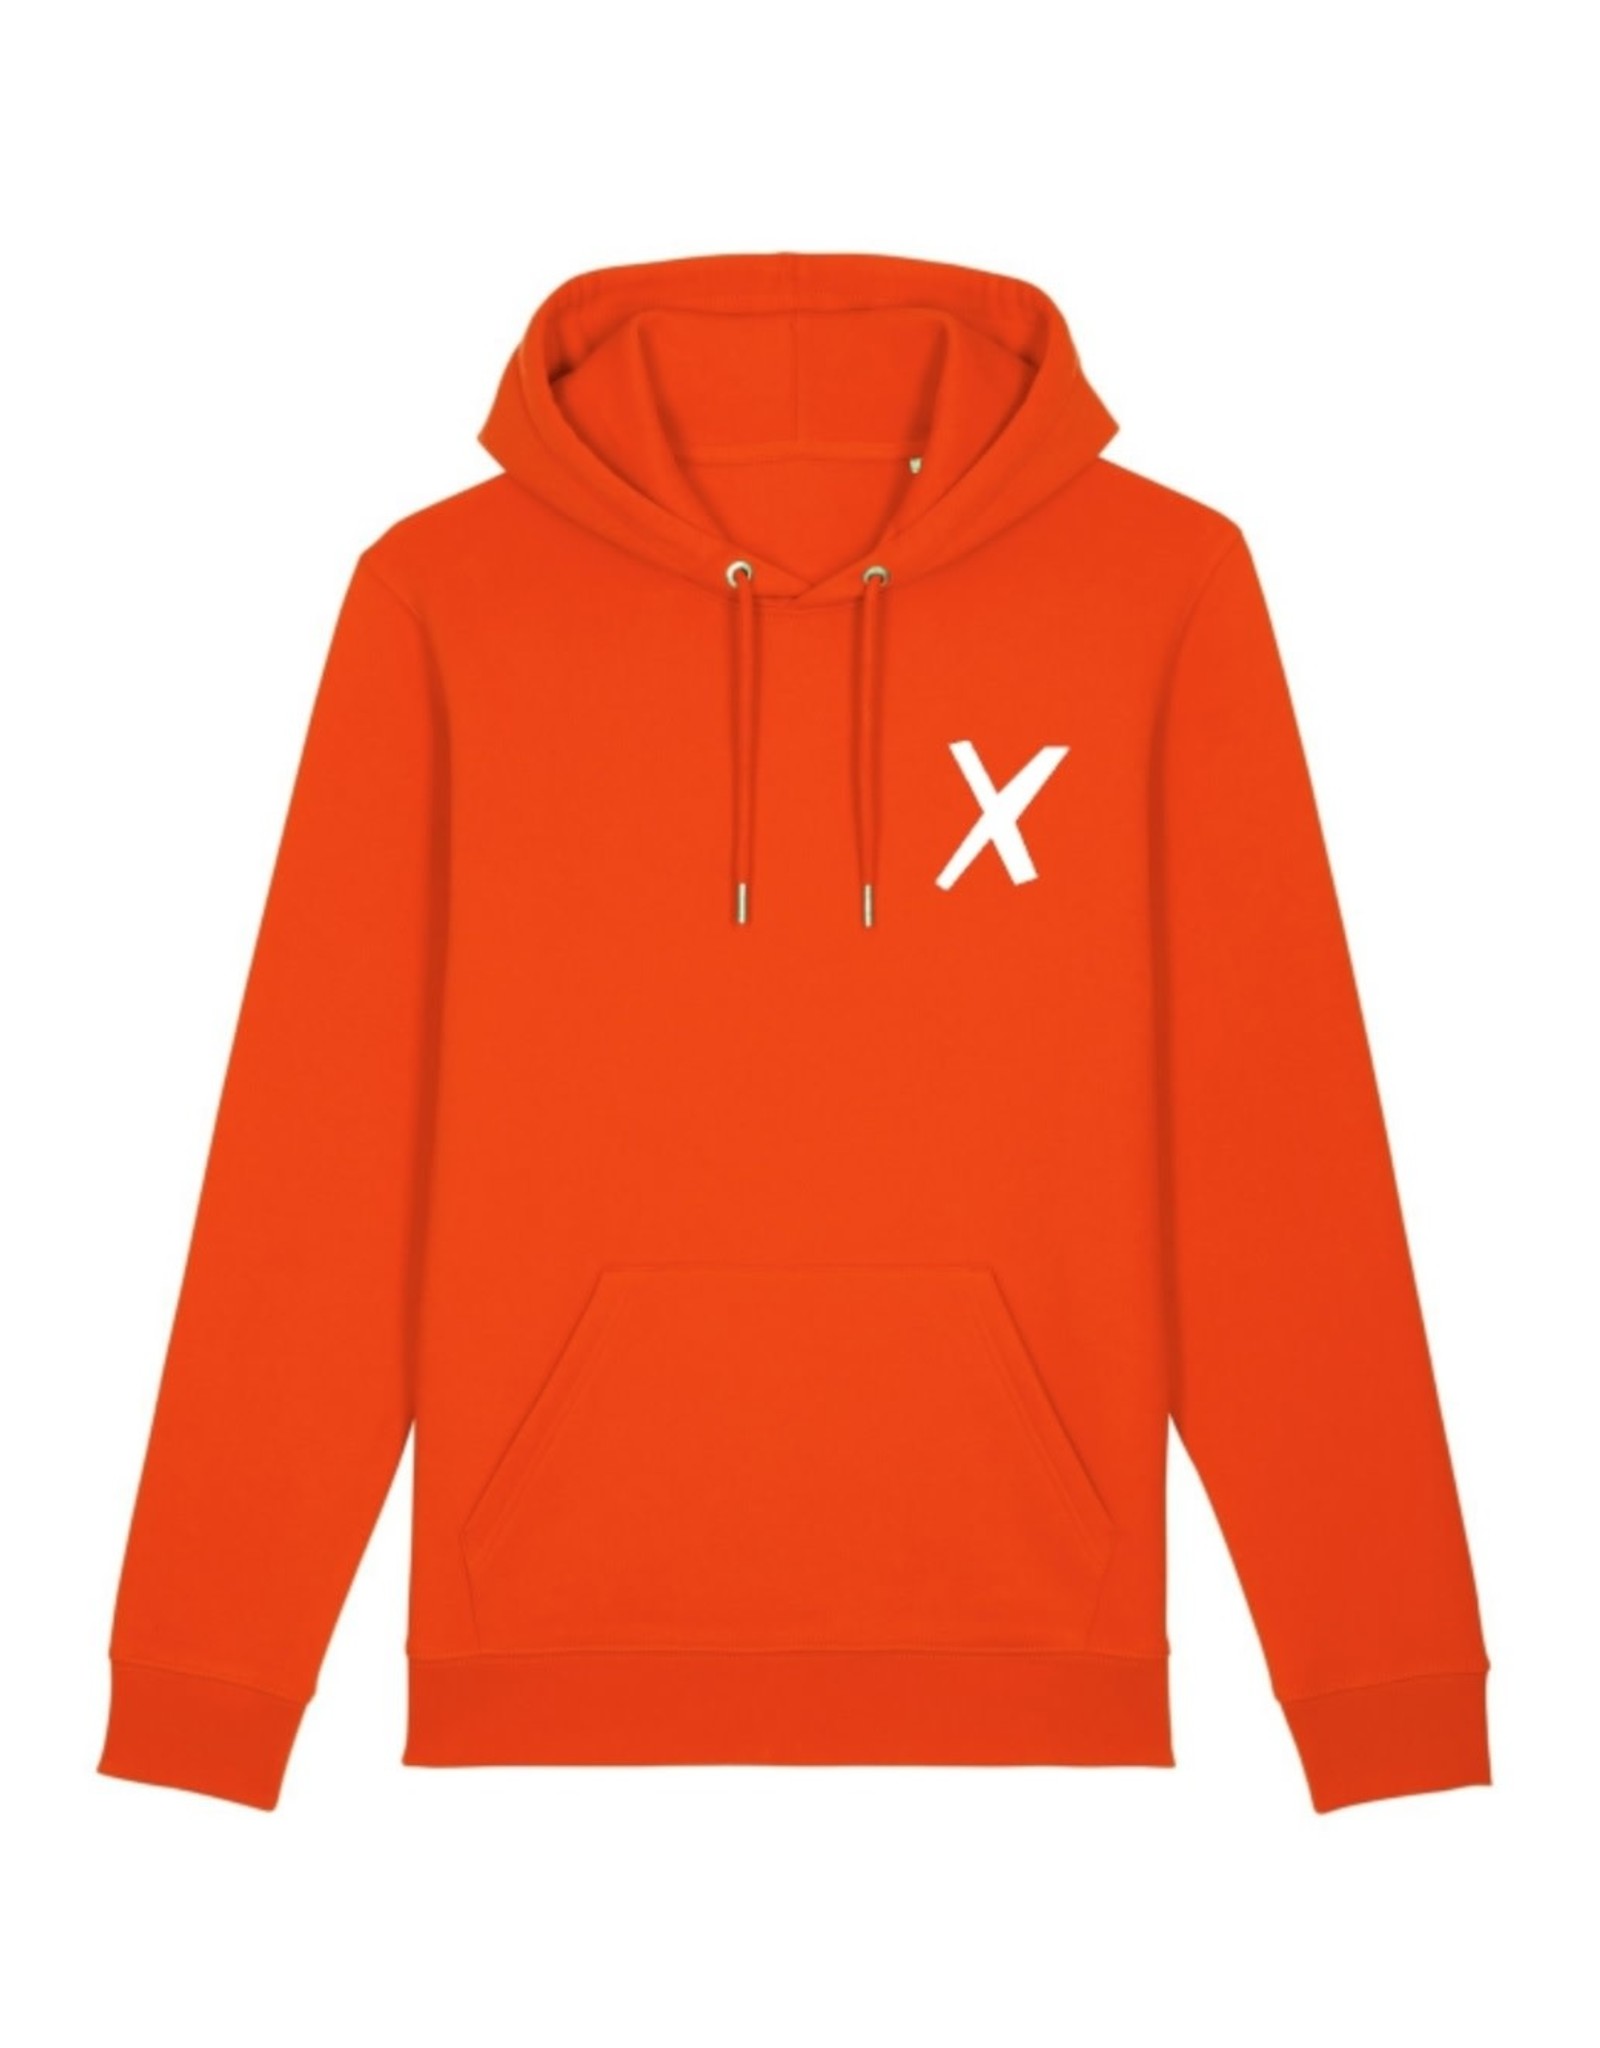 X-collection X-Hoodie vamp red laundry white